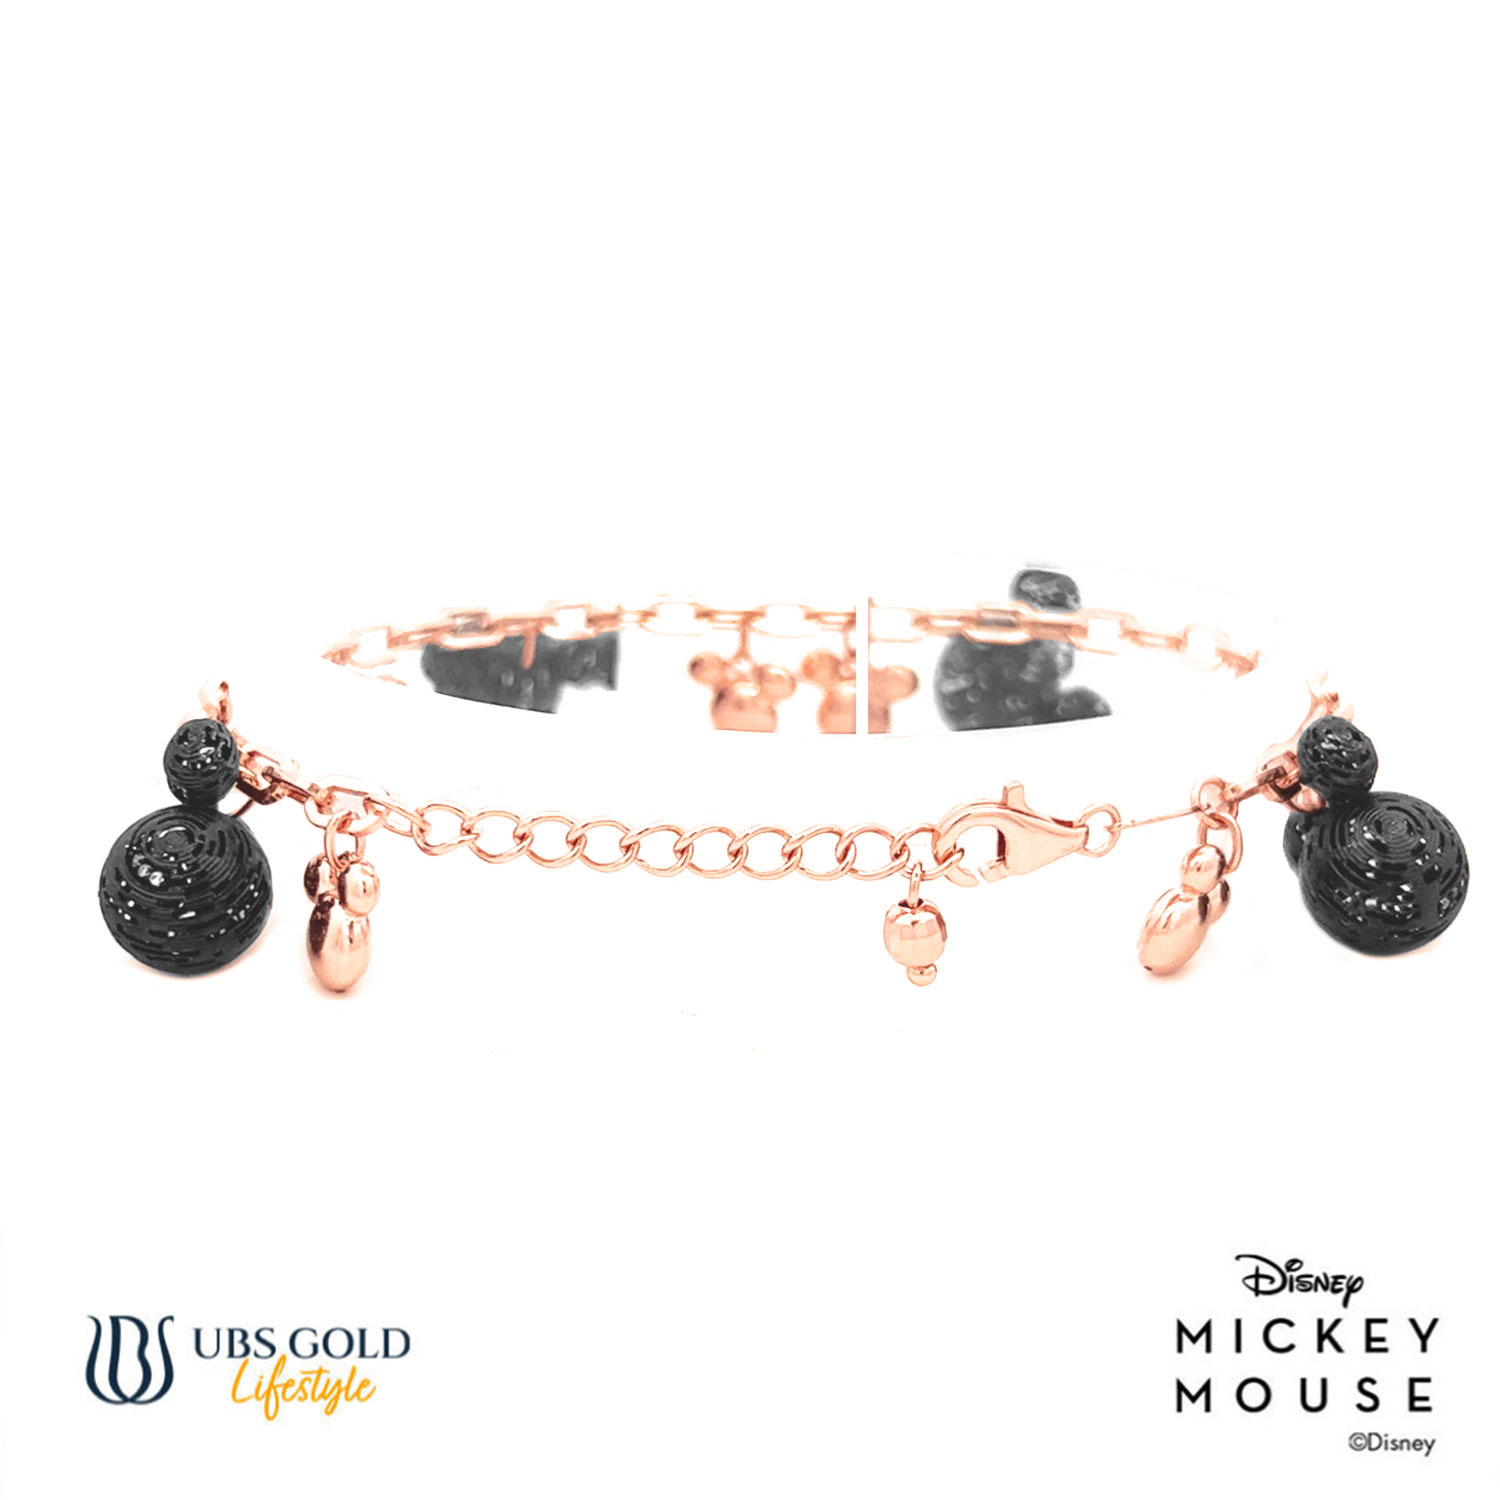 UBS Gold Gelang Emas Disney Mickey Mouse - Hgy0143 - 17K